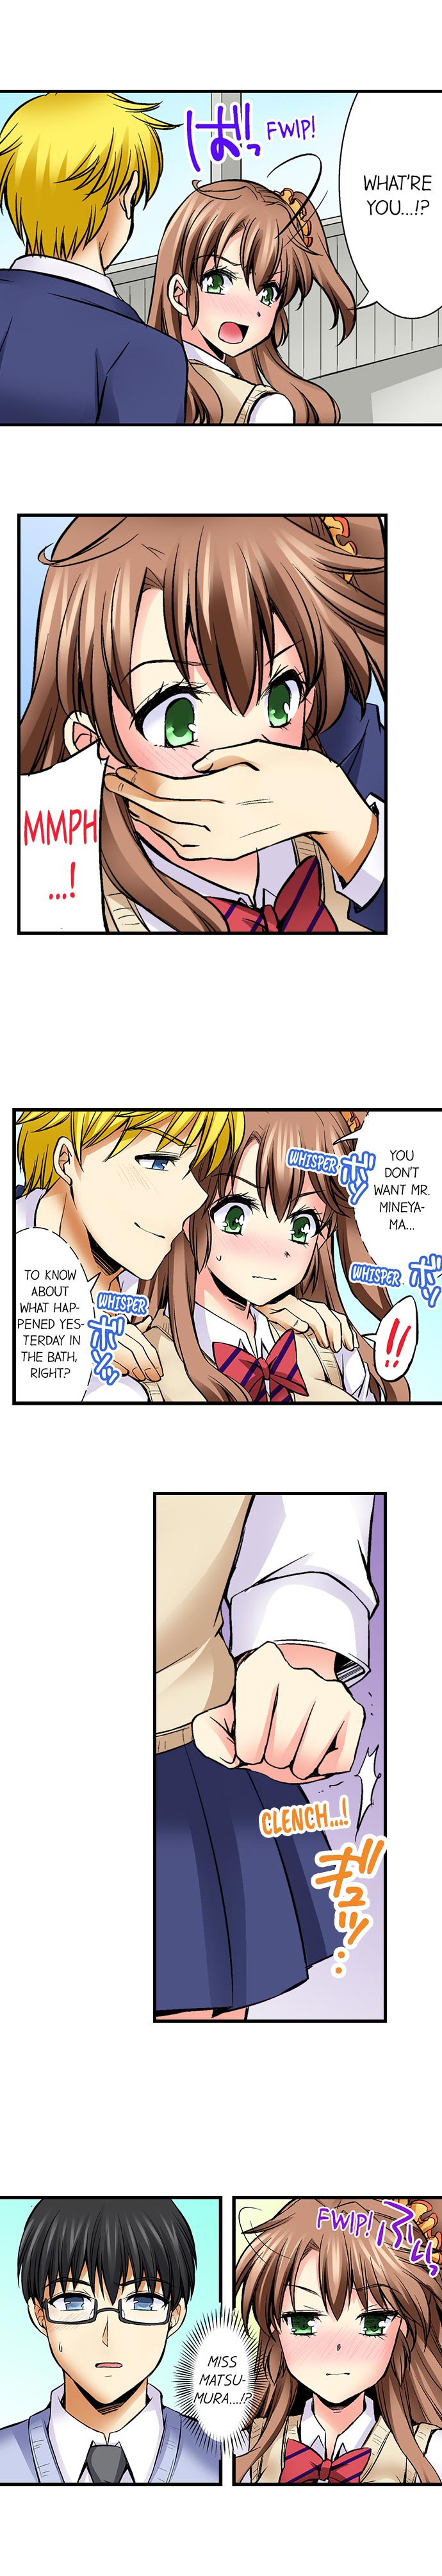 Why Can't i Have Sex With My Teacher? - Chapter 24 Page 7